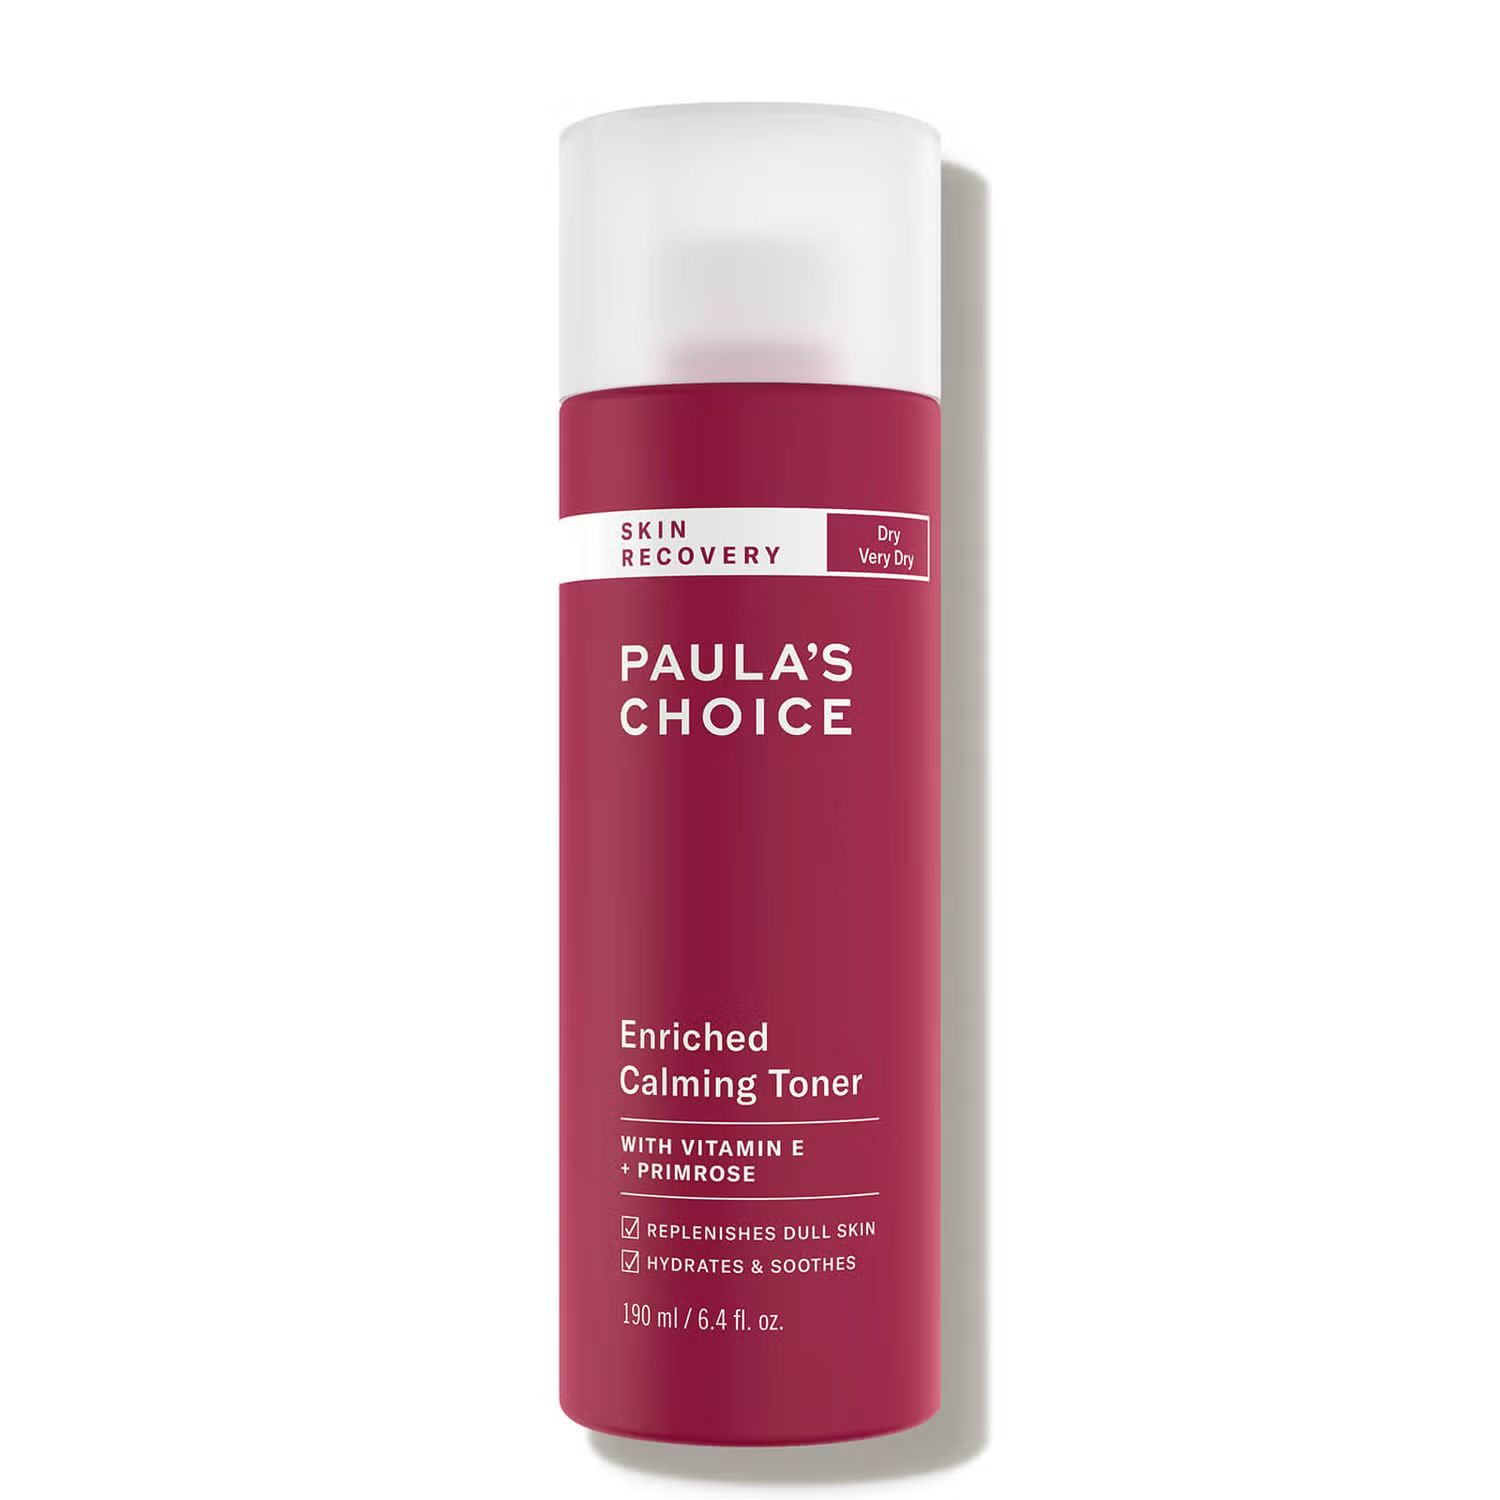 Paula's Choice SKIN RECOVERY Enriched Calming Toner (6.4 fl. oz.) | Dermstore (US)